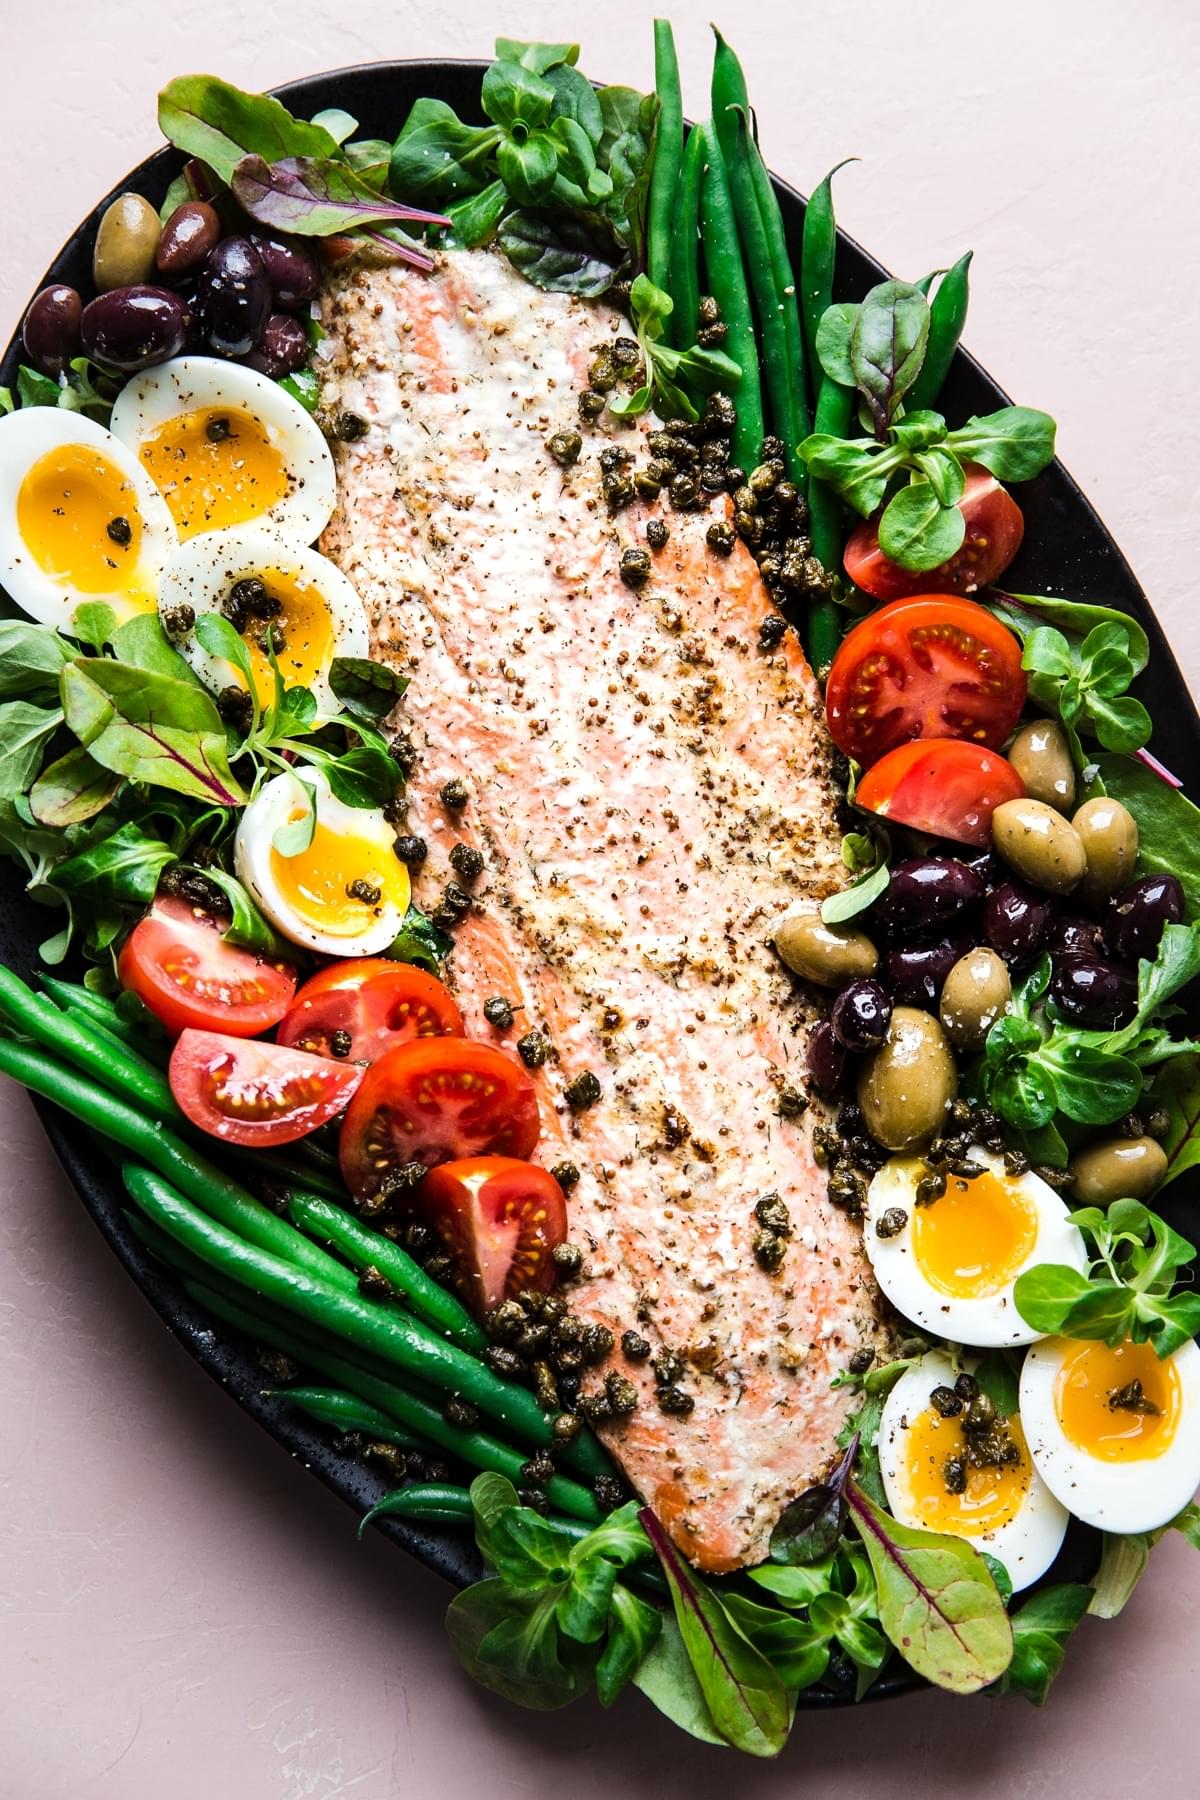 Salmon Niçoise Salad on a platter with olives, tomatoes, green beans, fried capers and soft boiled eggs.